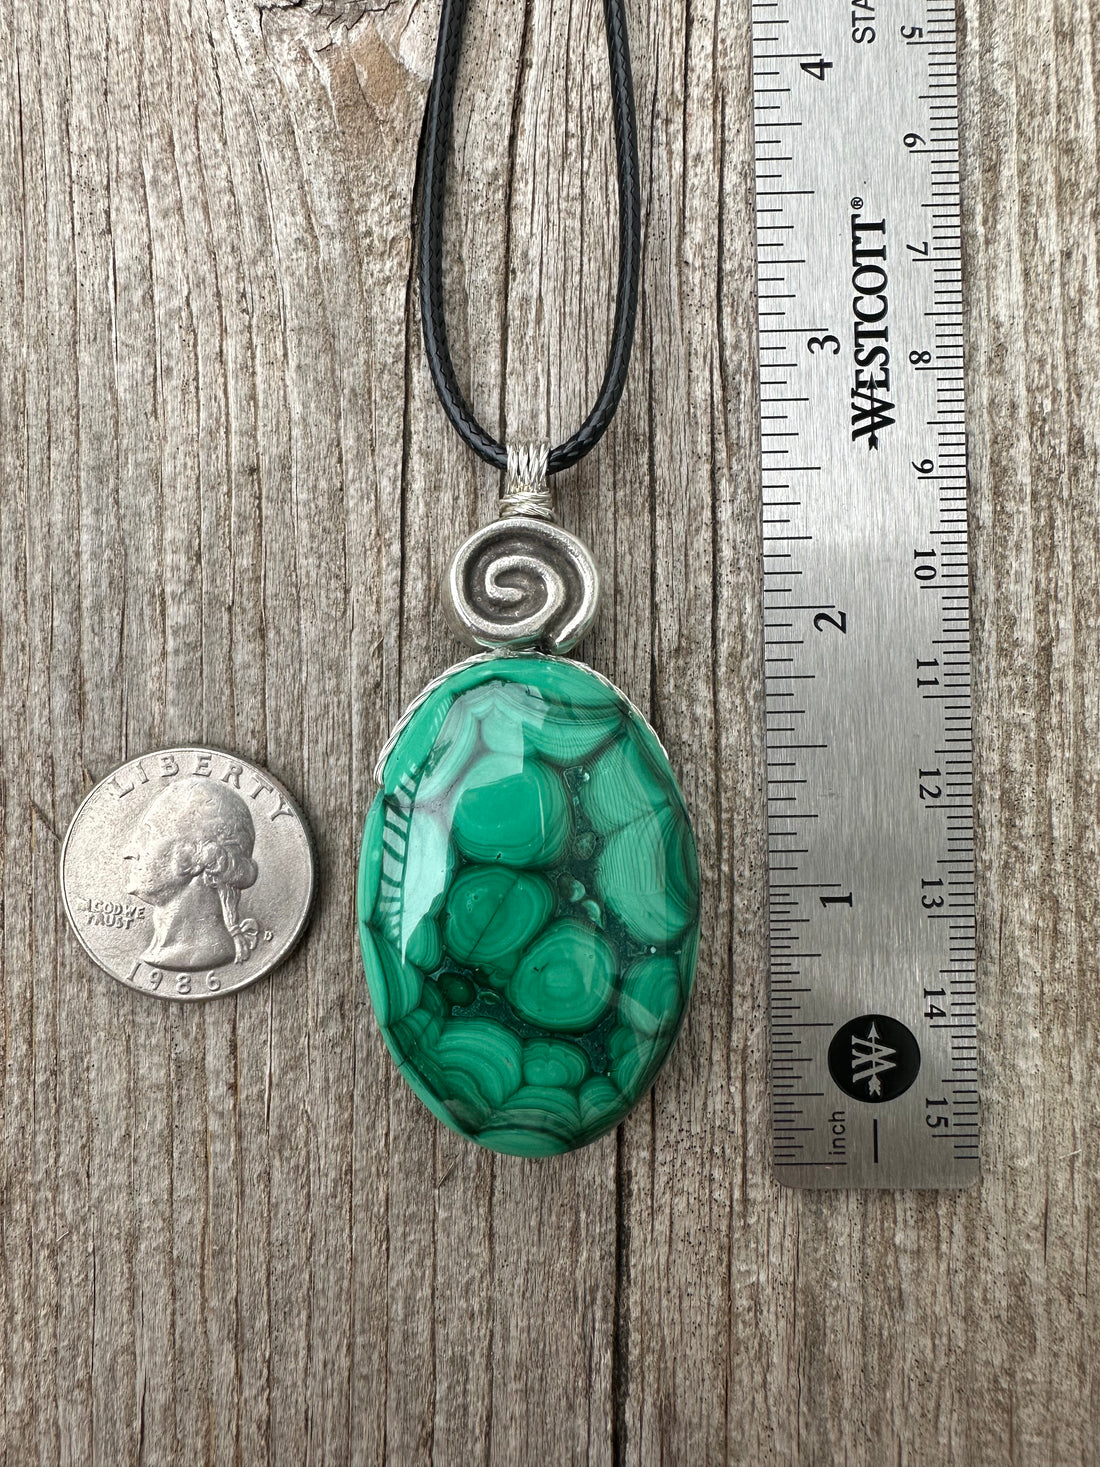 Malachite Necklace for Positivity, Psychic Growth and Amplifying Energy.